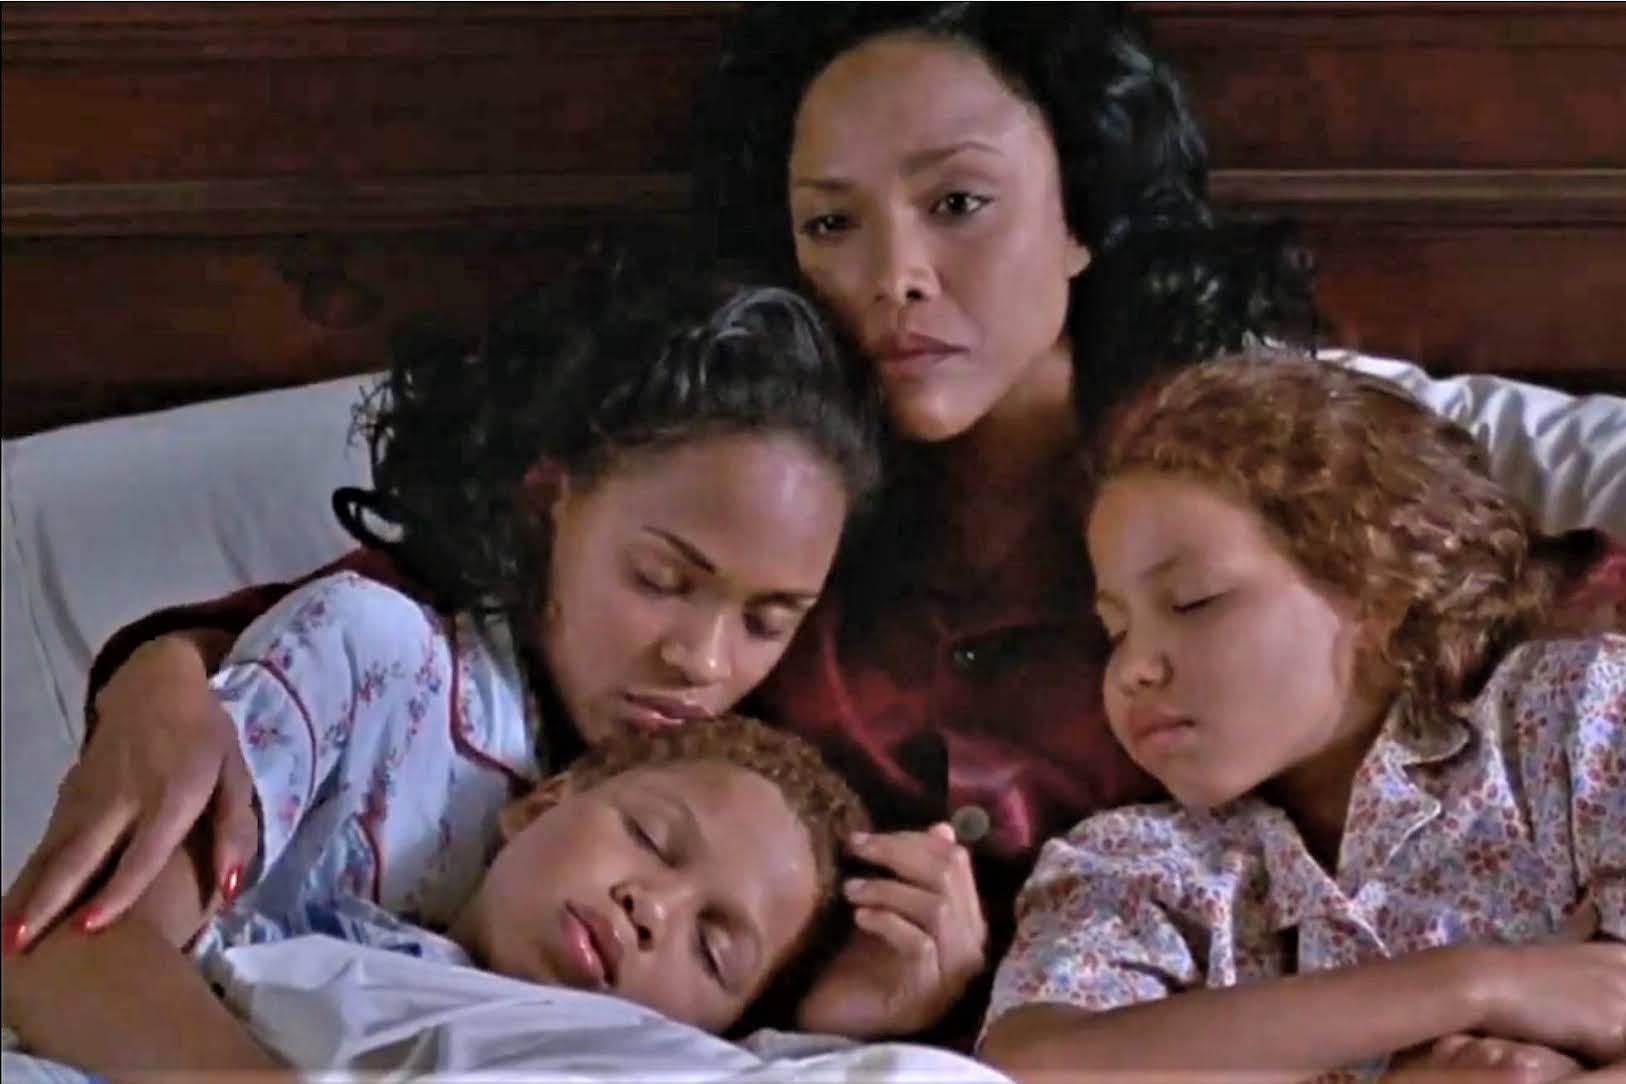 A mother holds her three children in her arms as they lie in bed.